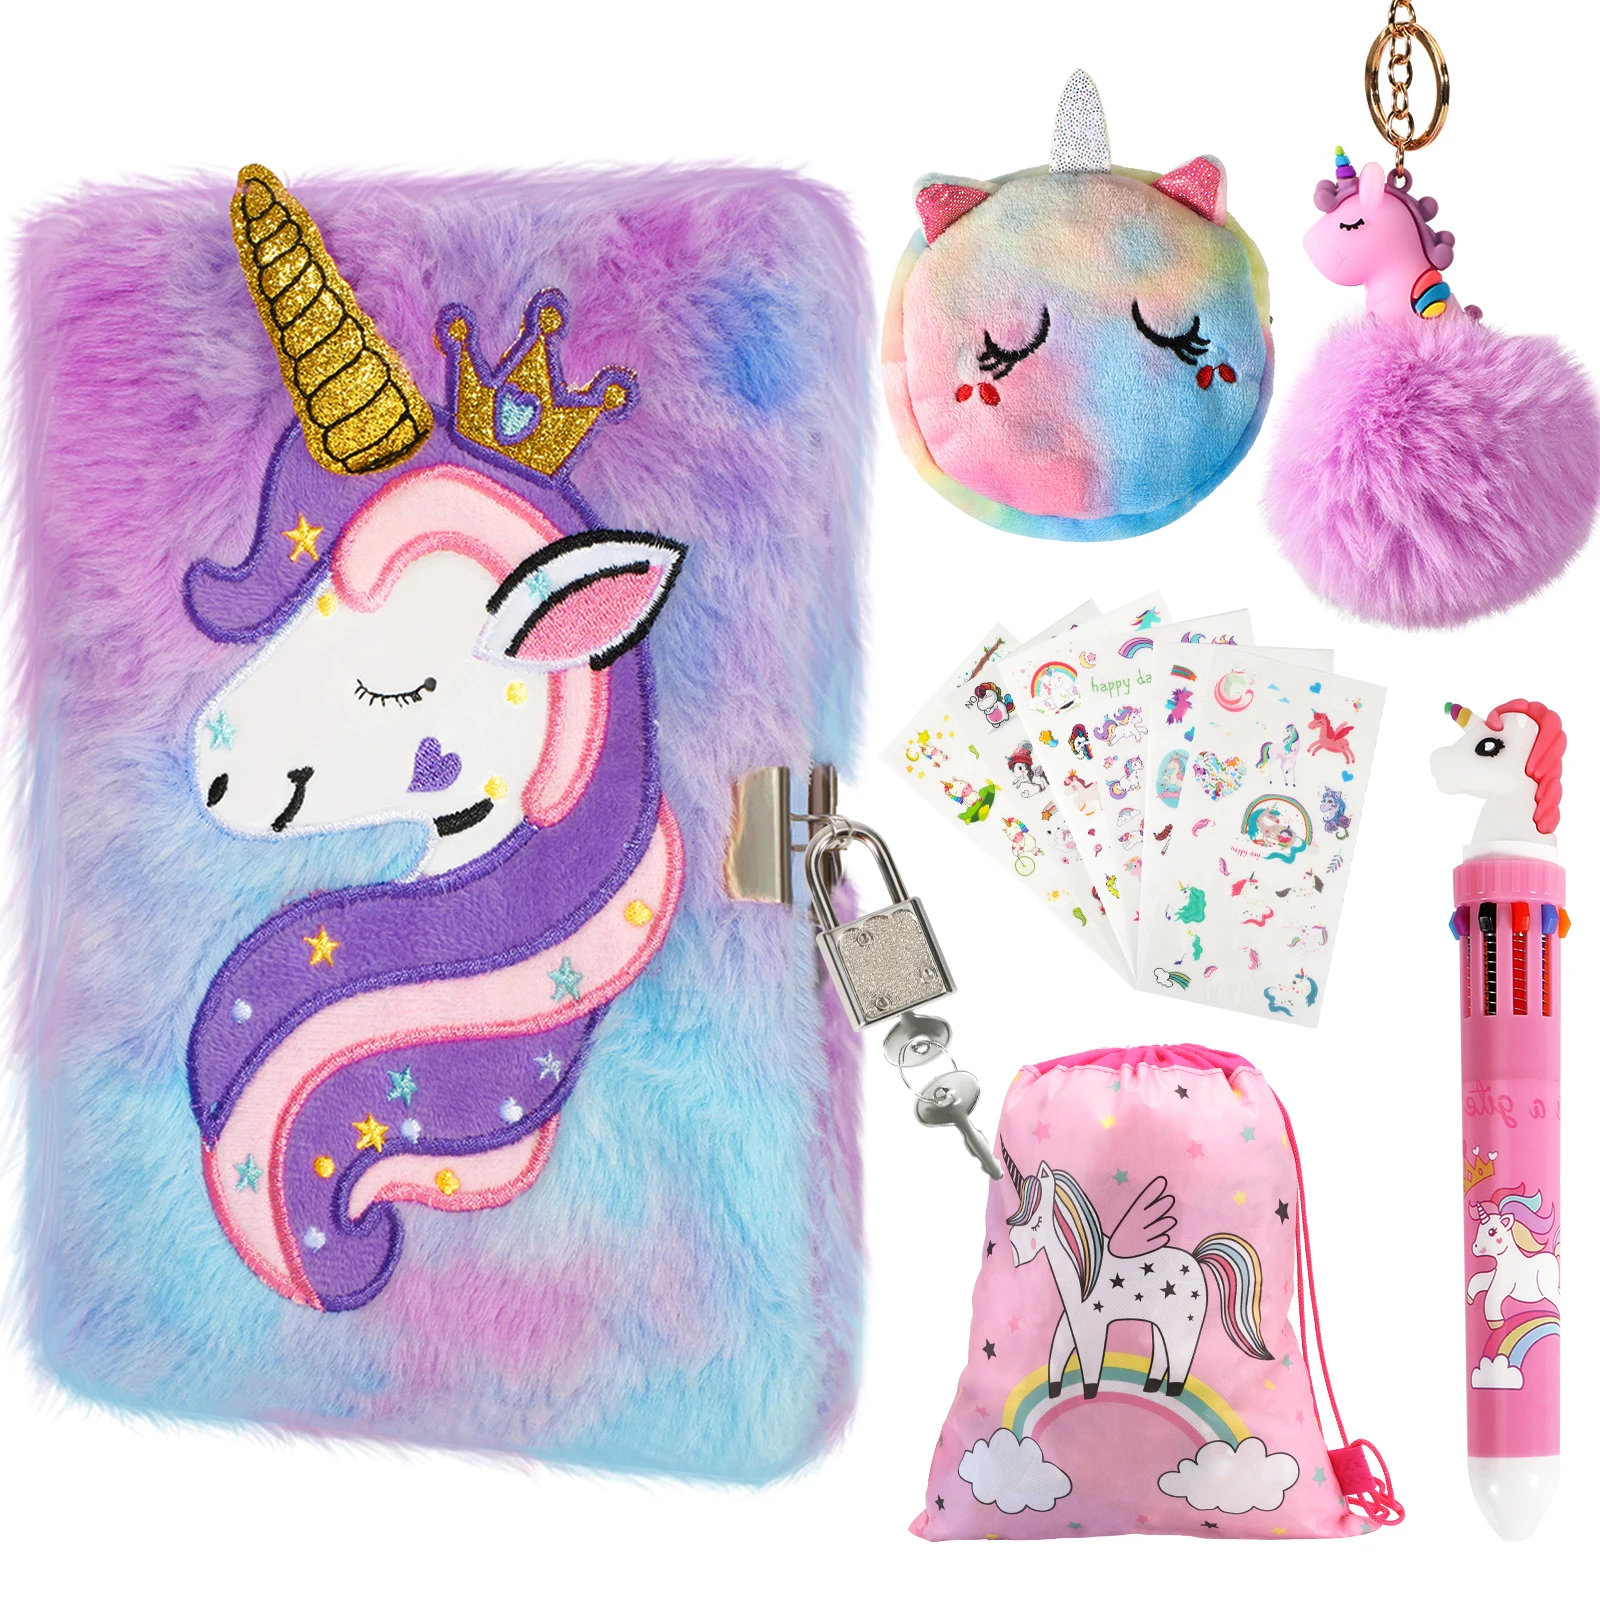 Plush Unicorn Diary With Lock For Kids Cute Padlock Secret Notebook Student School A5 Size Stationery Memo Pads For Girls Gift